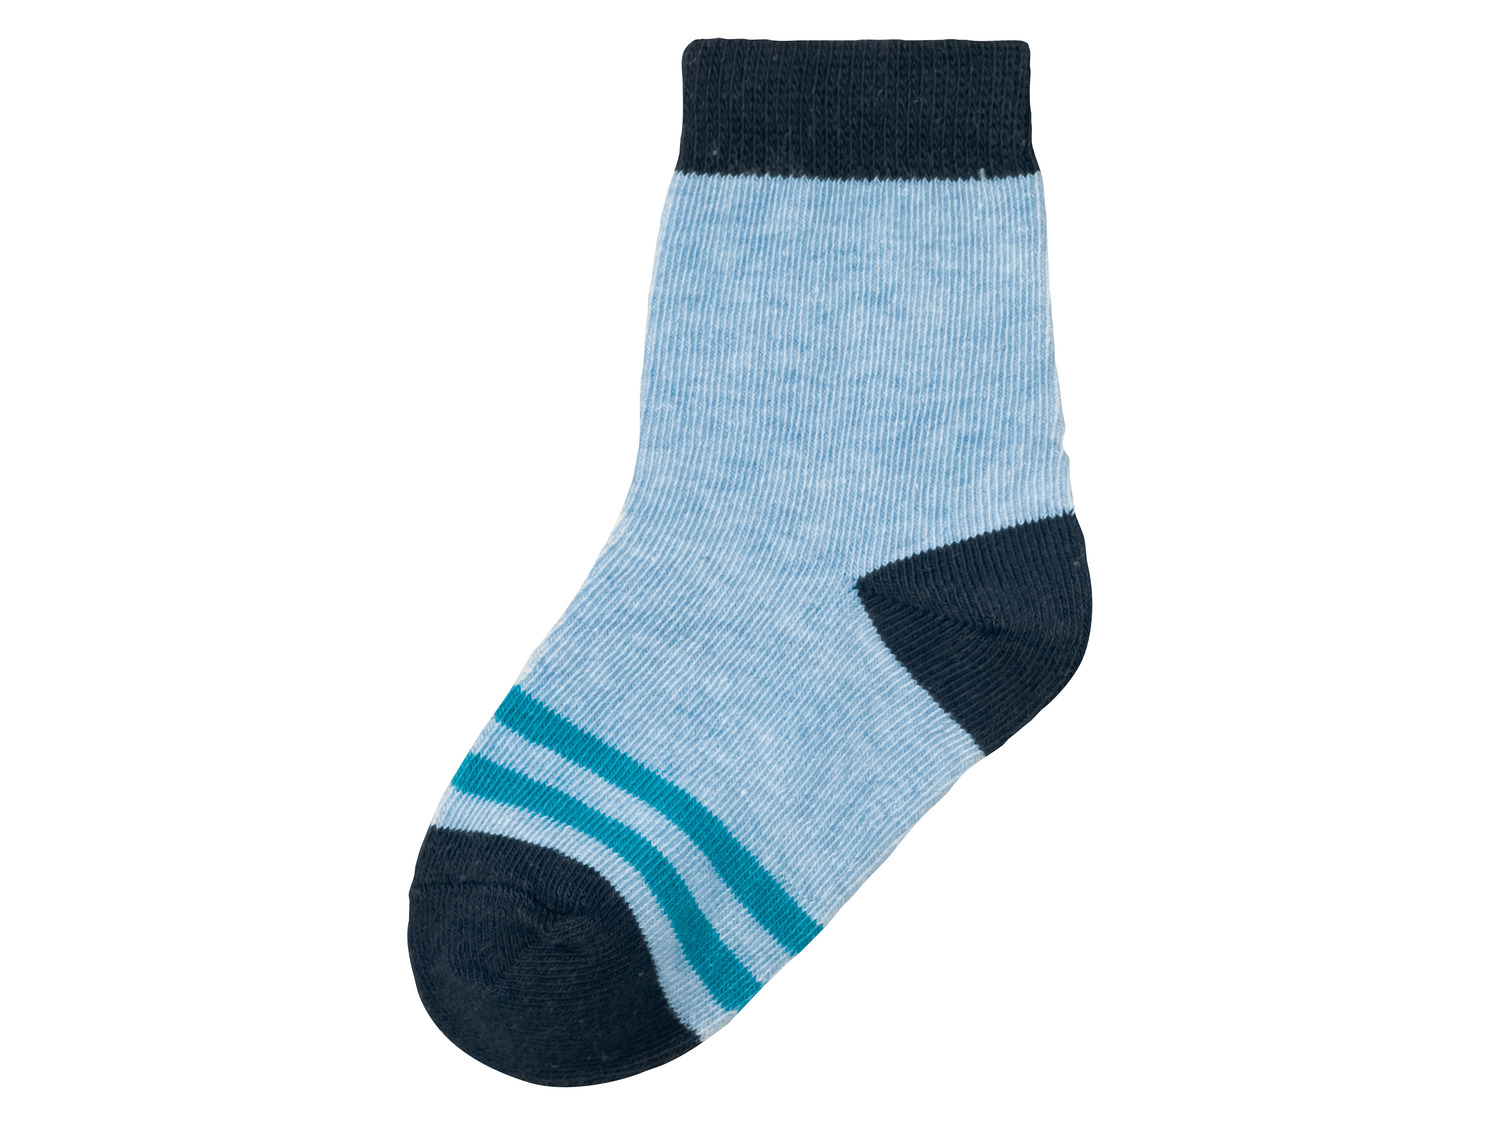 1 paire de chaussettes Thermo-isolante pointure 23-26 - Lupilu